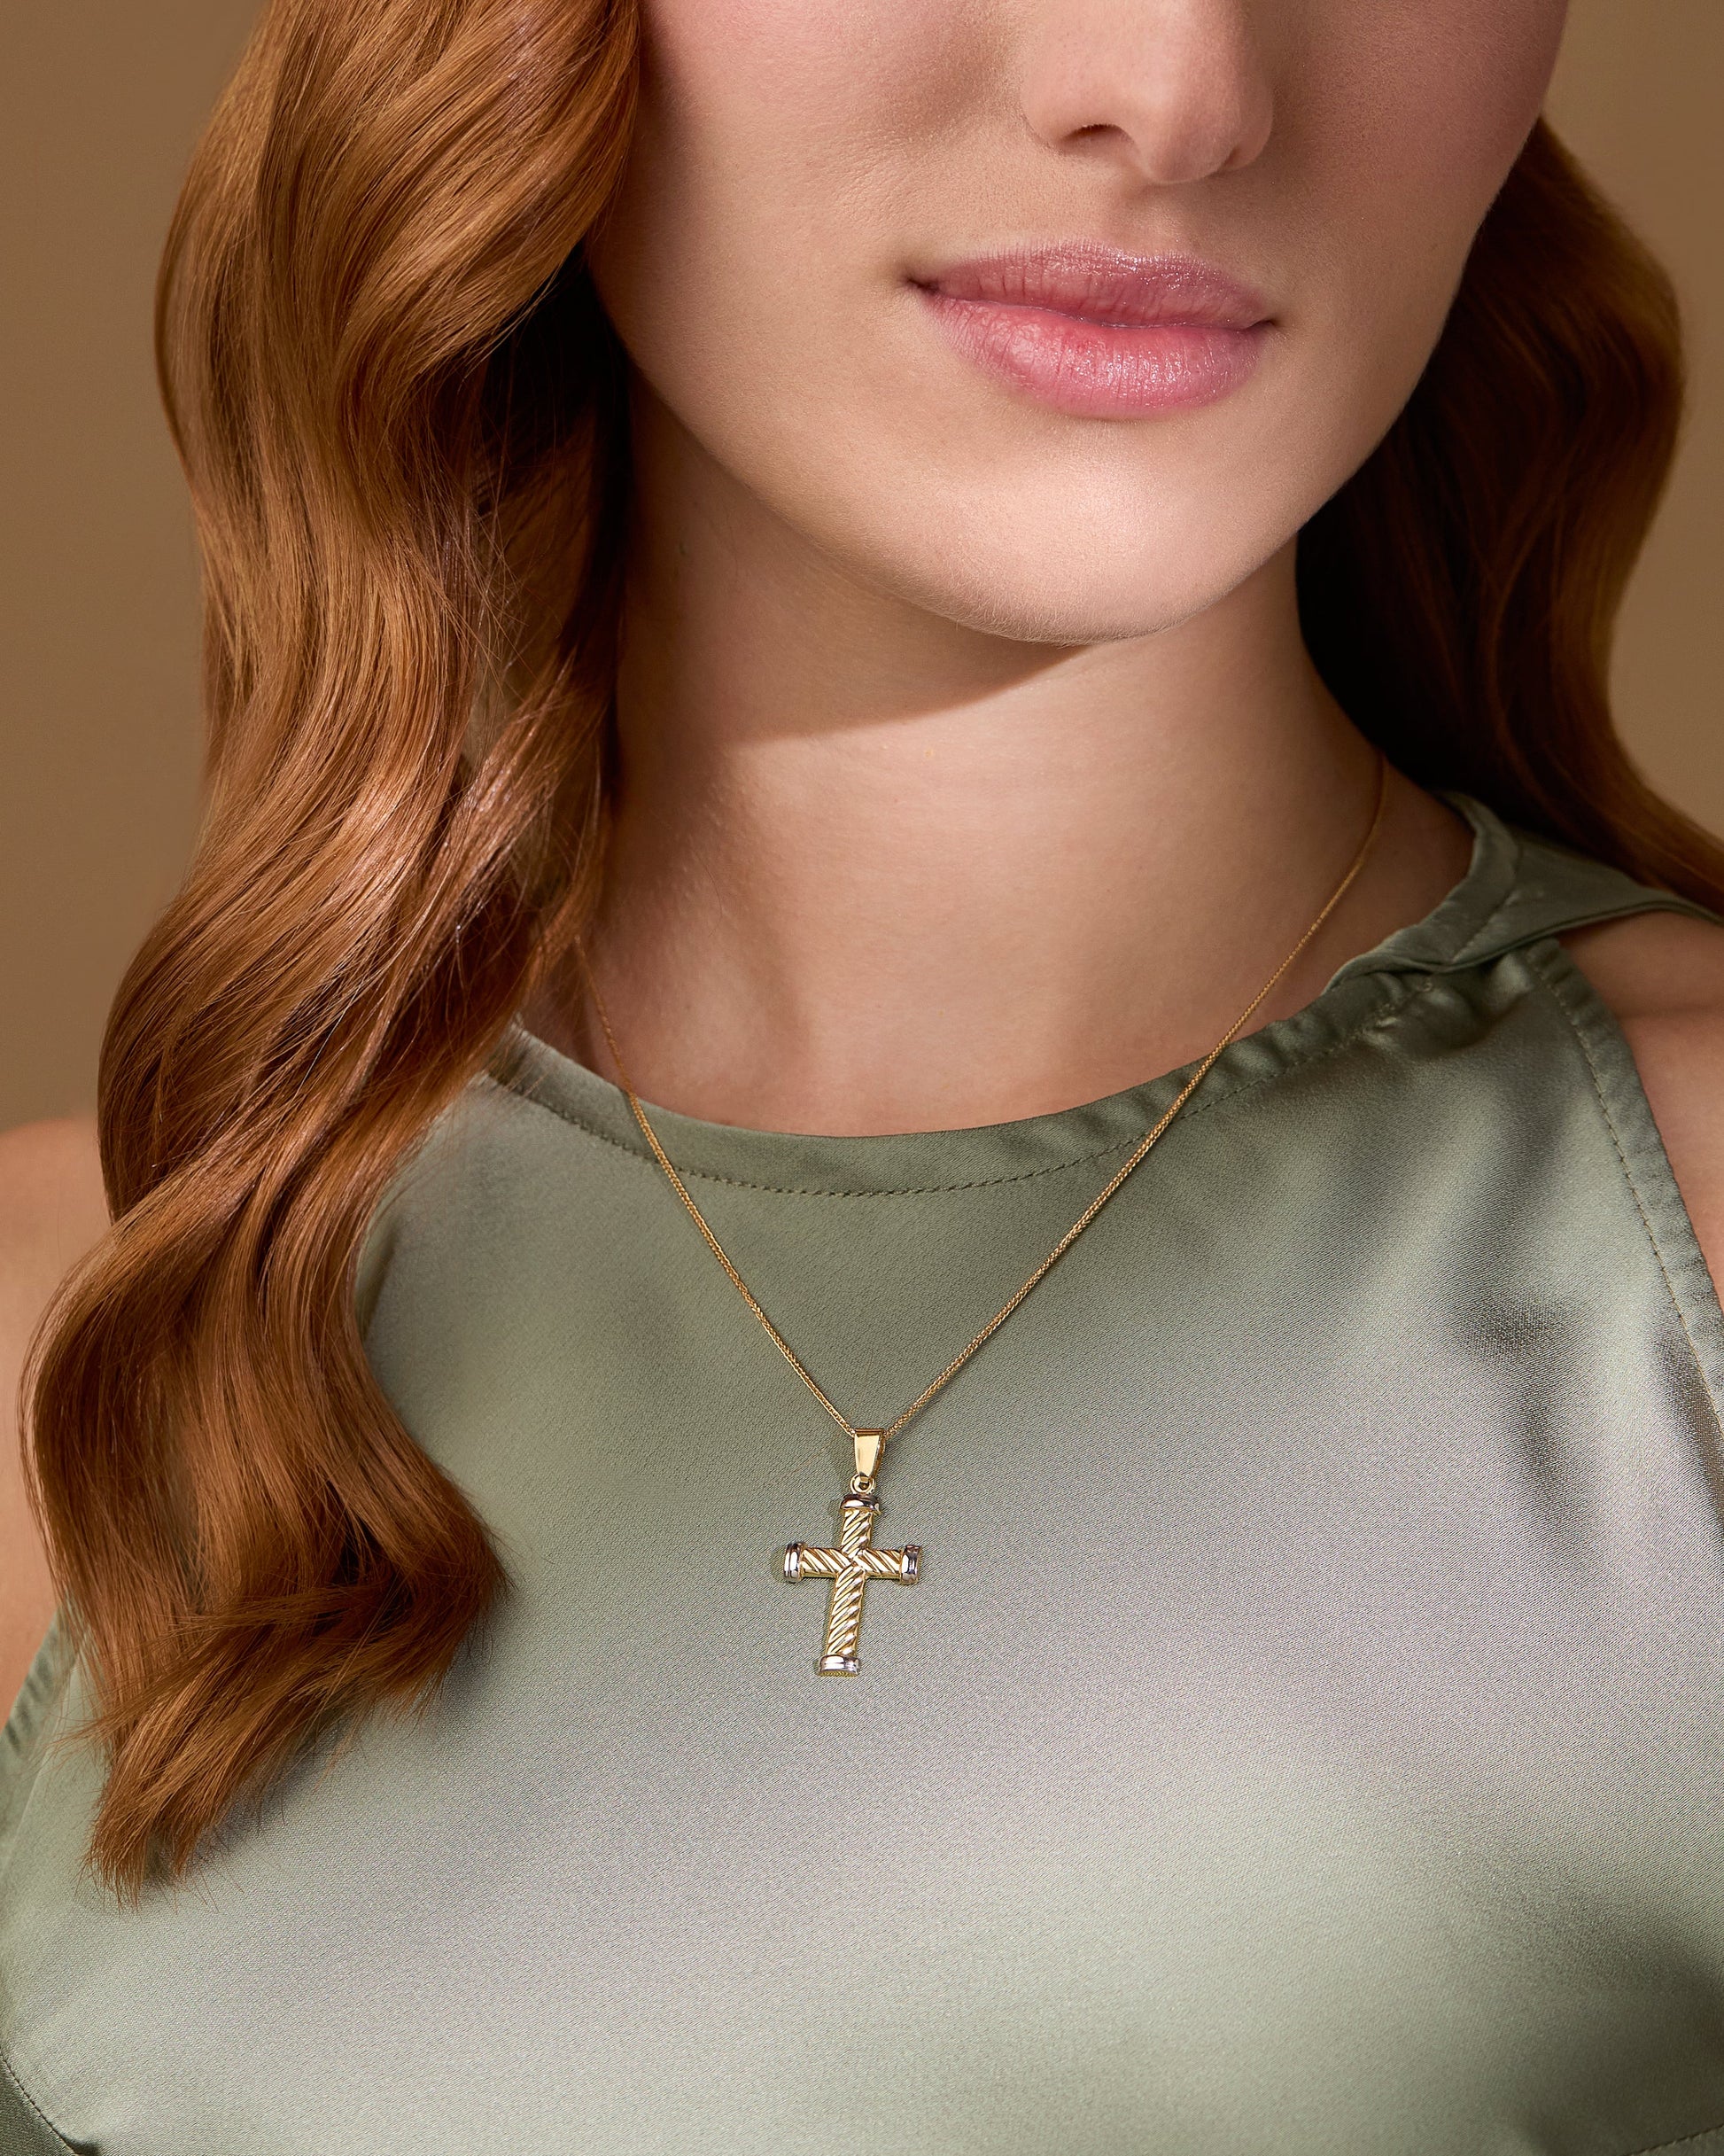 Mondo Cattolico Pendant 30 mm (1.18 in) Yellow Gold Striped Cross Pendant With White Gold Ends